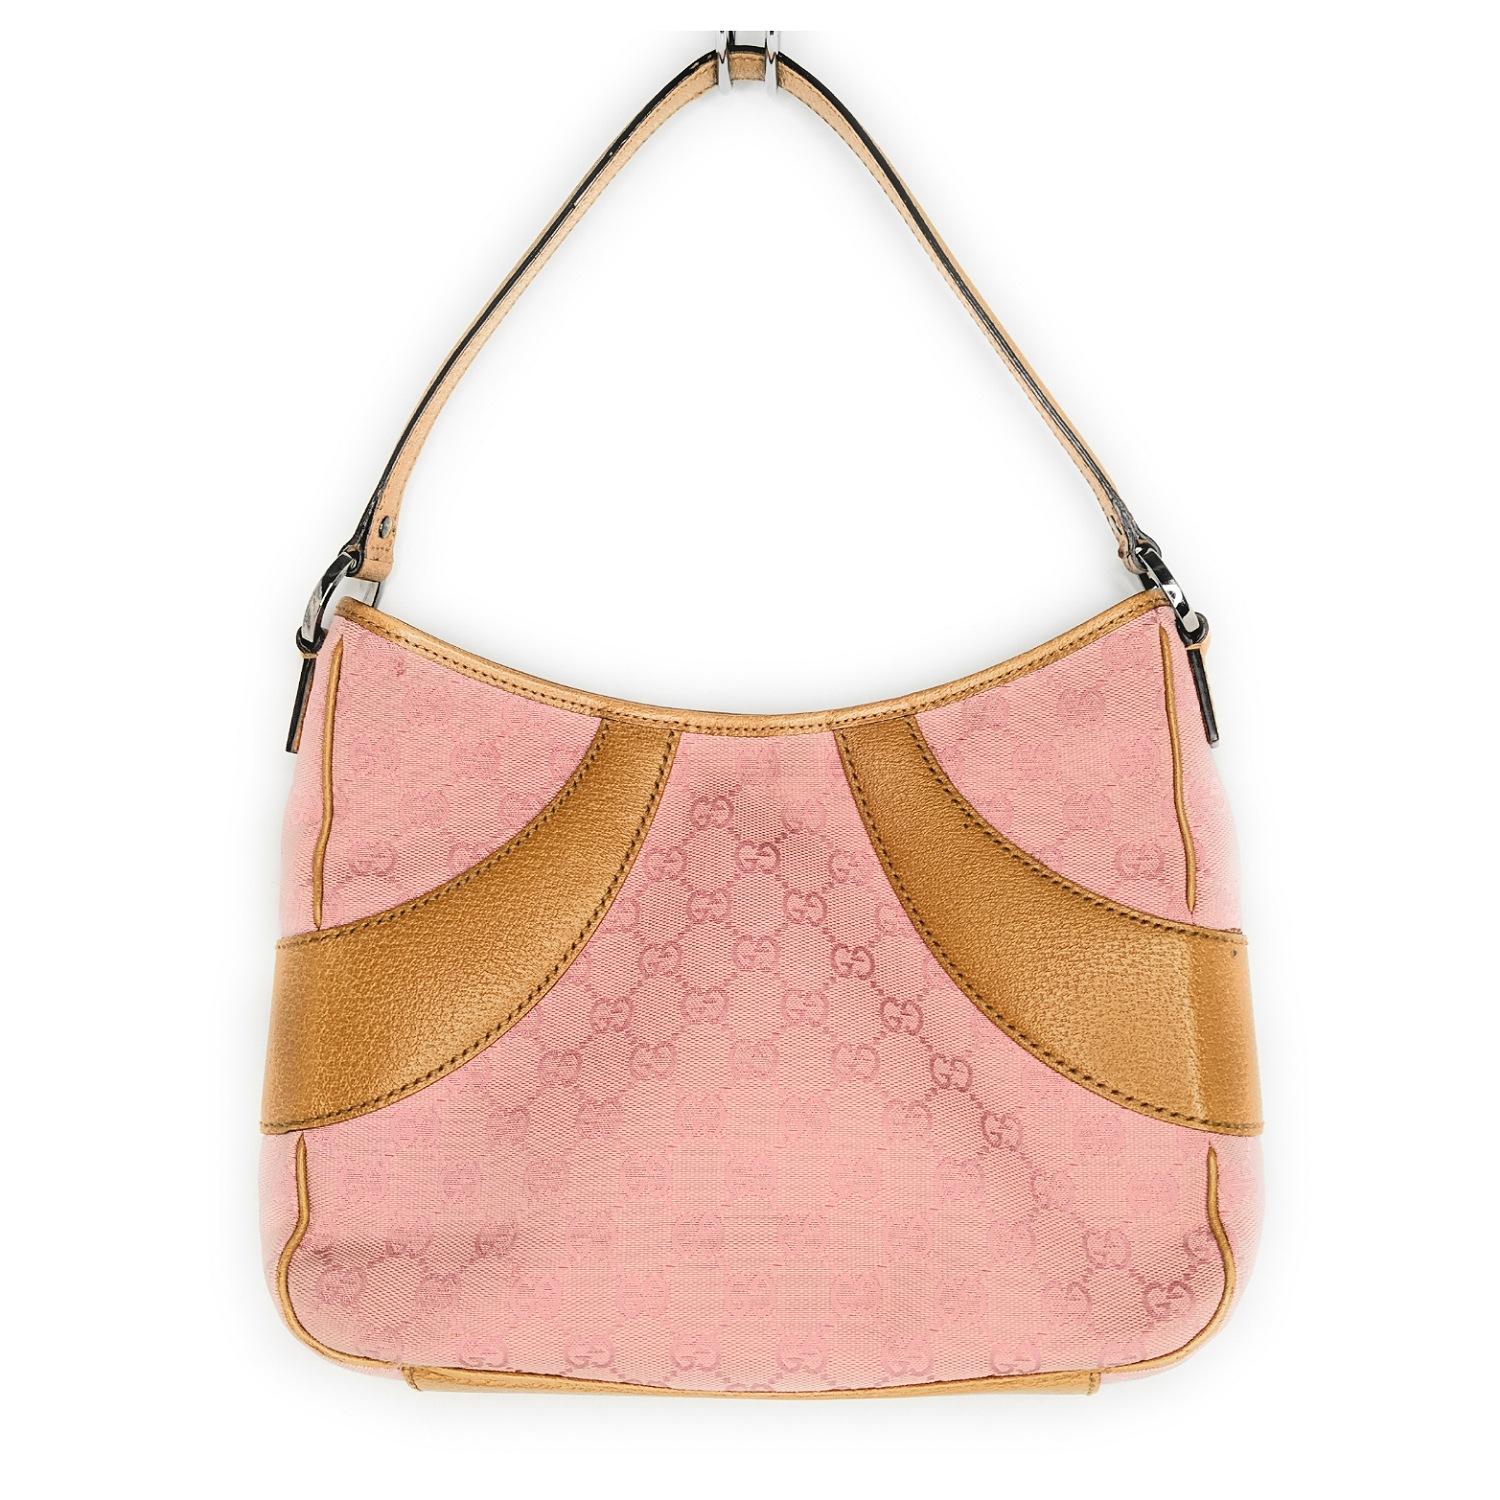 It's a chic Gucci handbag for any occasion. It features the GG Monogram canvas in pink with tan leather trim, a flat handle, and ruthenium-tone hardware. The interior has a brown textile lining with a zip pocket and a snap magnetic closure. It's a